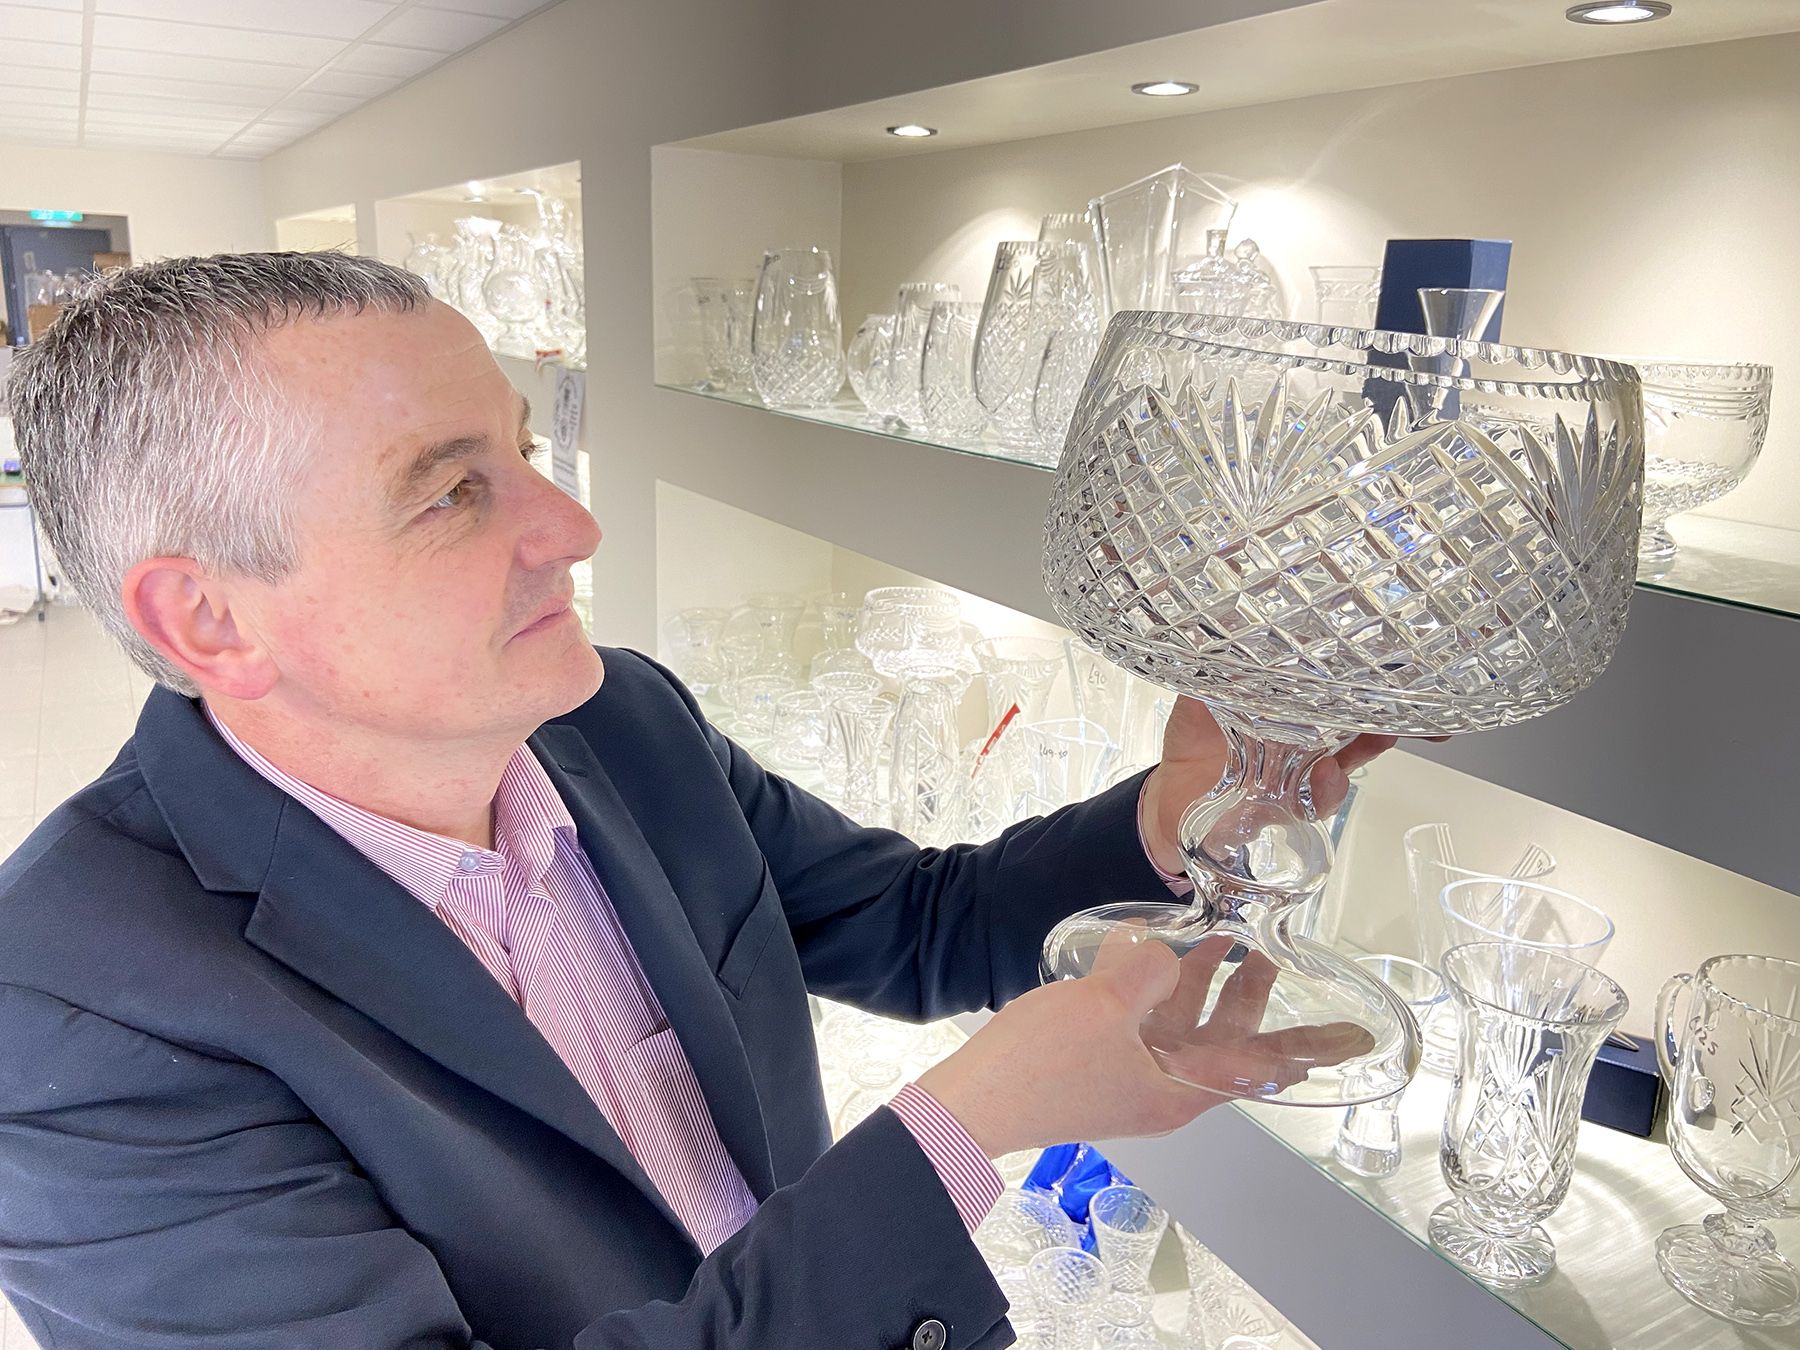 Belfast Crystal celebrates 44 years in business this year